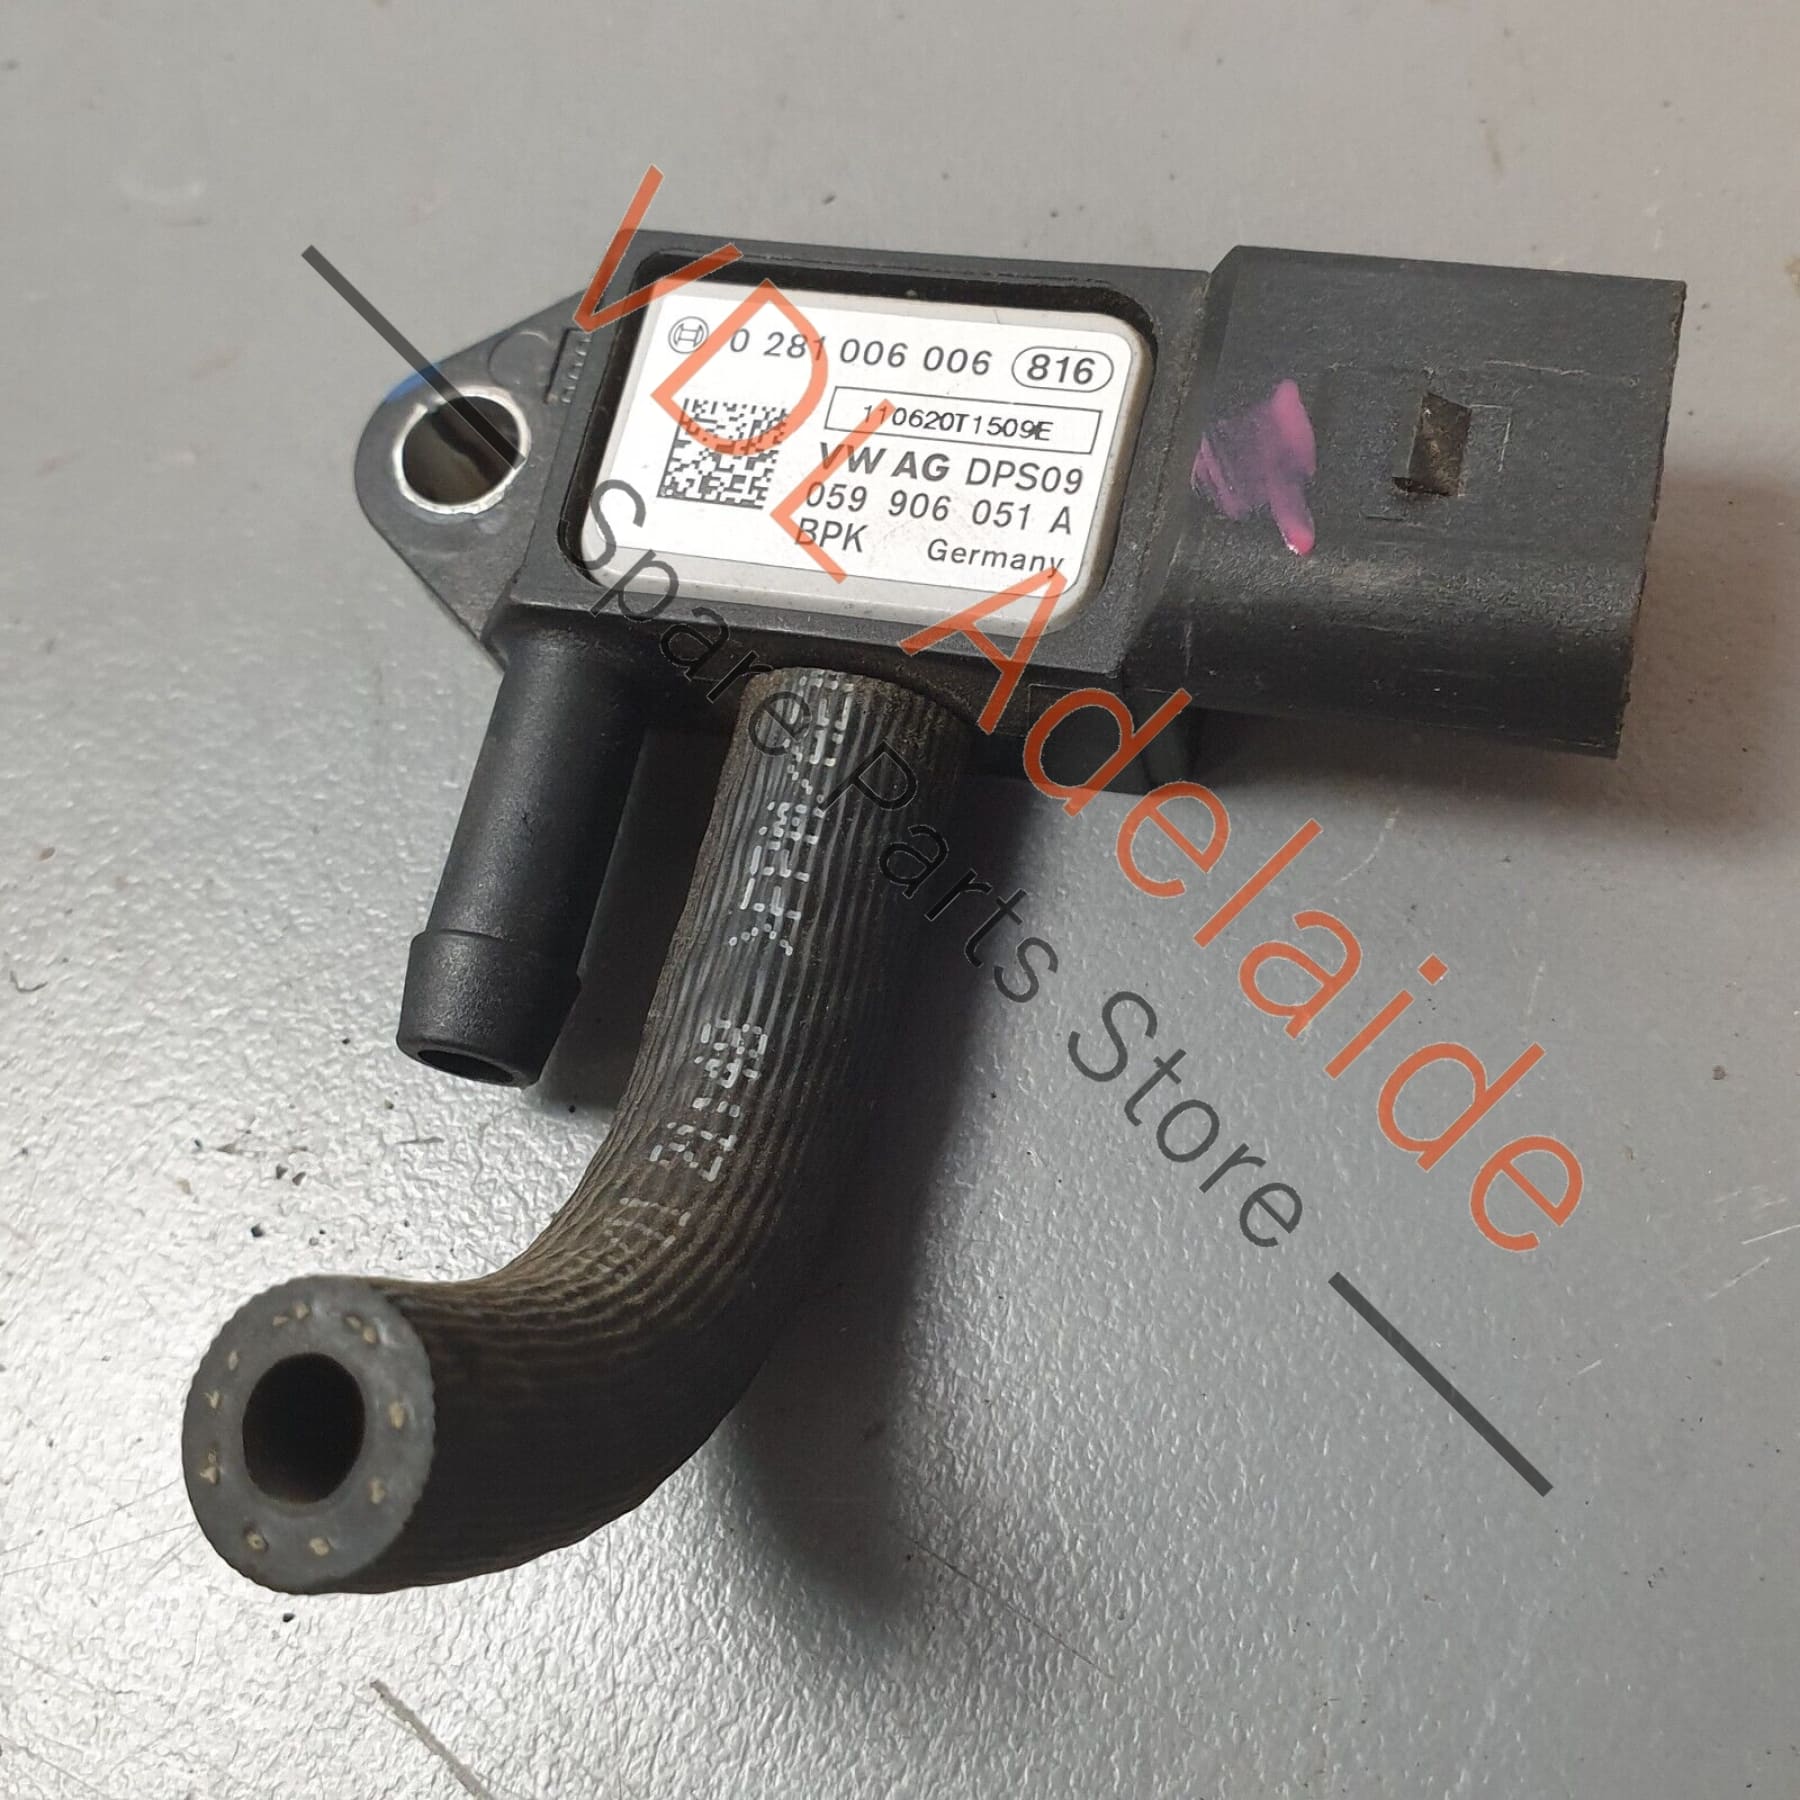 Audi Q7 6.0L V12 4L Exhaust Gas Pressure Difference Sender for DPF 059906051A 059906051A